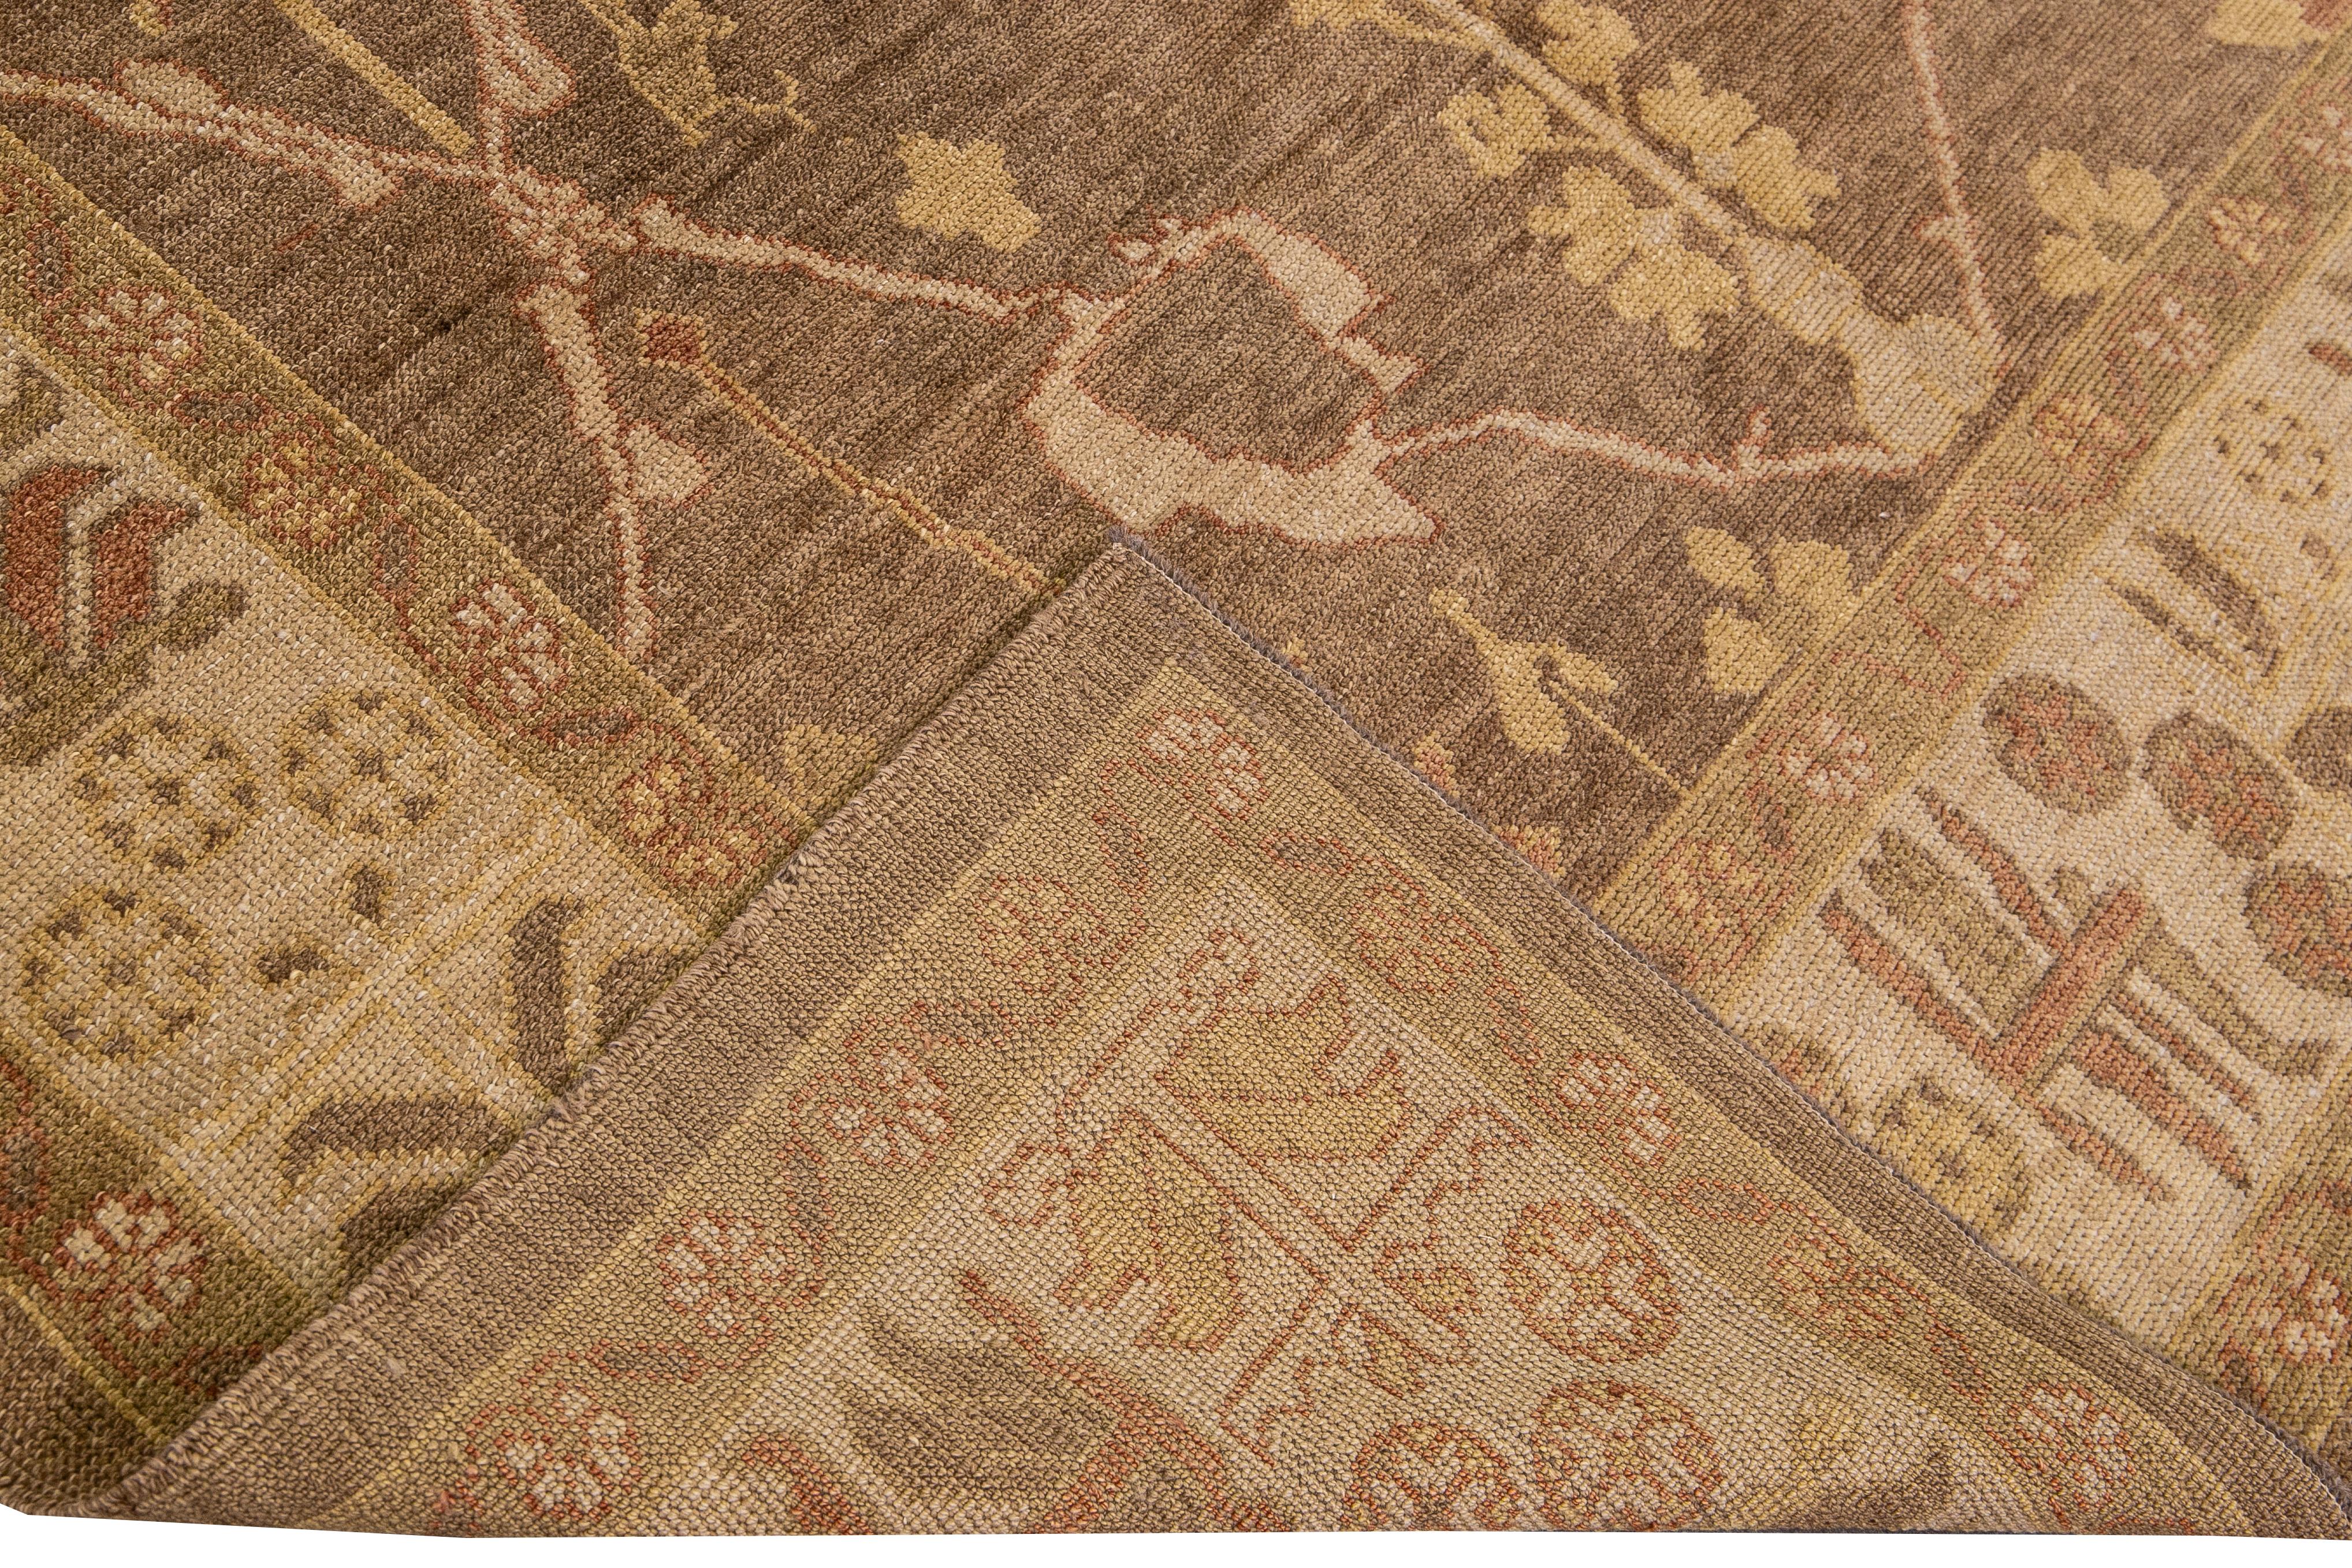 Beautiful Modern Turkish Oushak hand-knotted wool rug with a brown field. This Oushak has a beige frame and accents of golden, tan, and brown in an all-over geometric floral design.

This Rug measures: 7'10